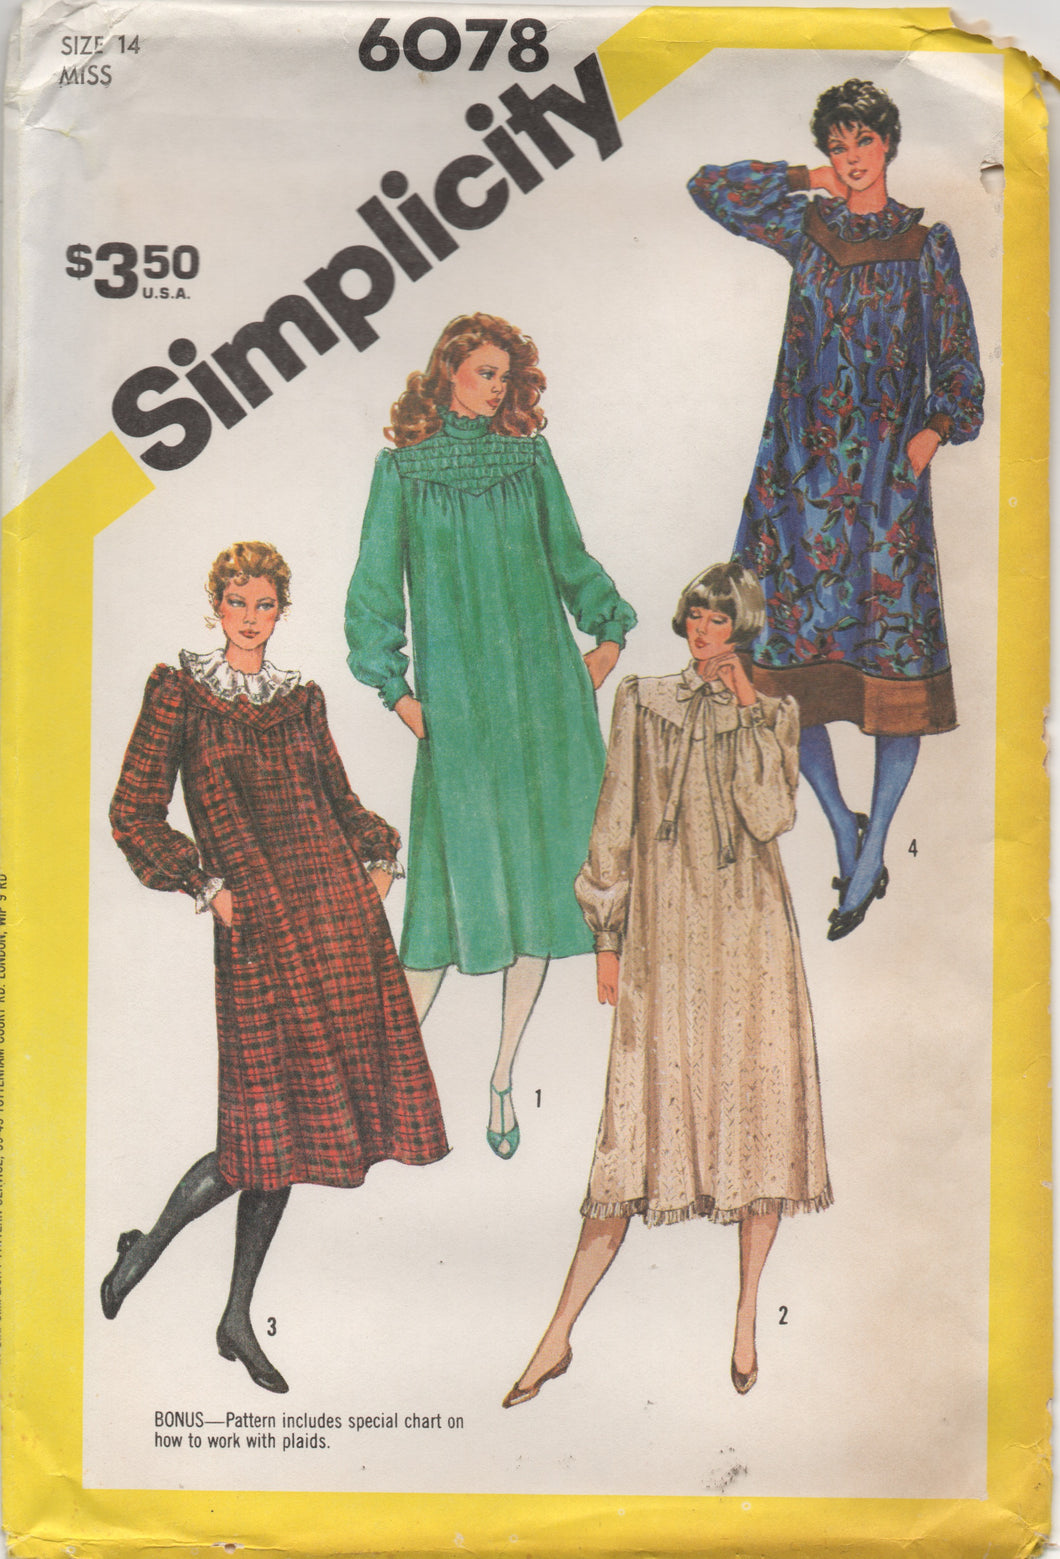 1980's Simplicity Large Yoked Dress Pattern with Ruffle Collar and Pockets - Bust 36